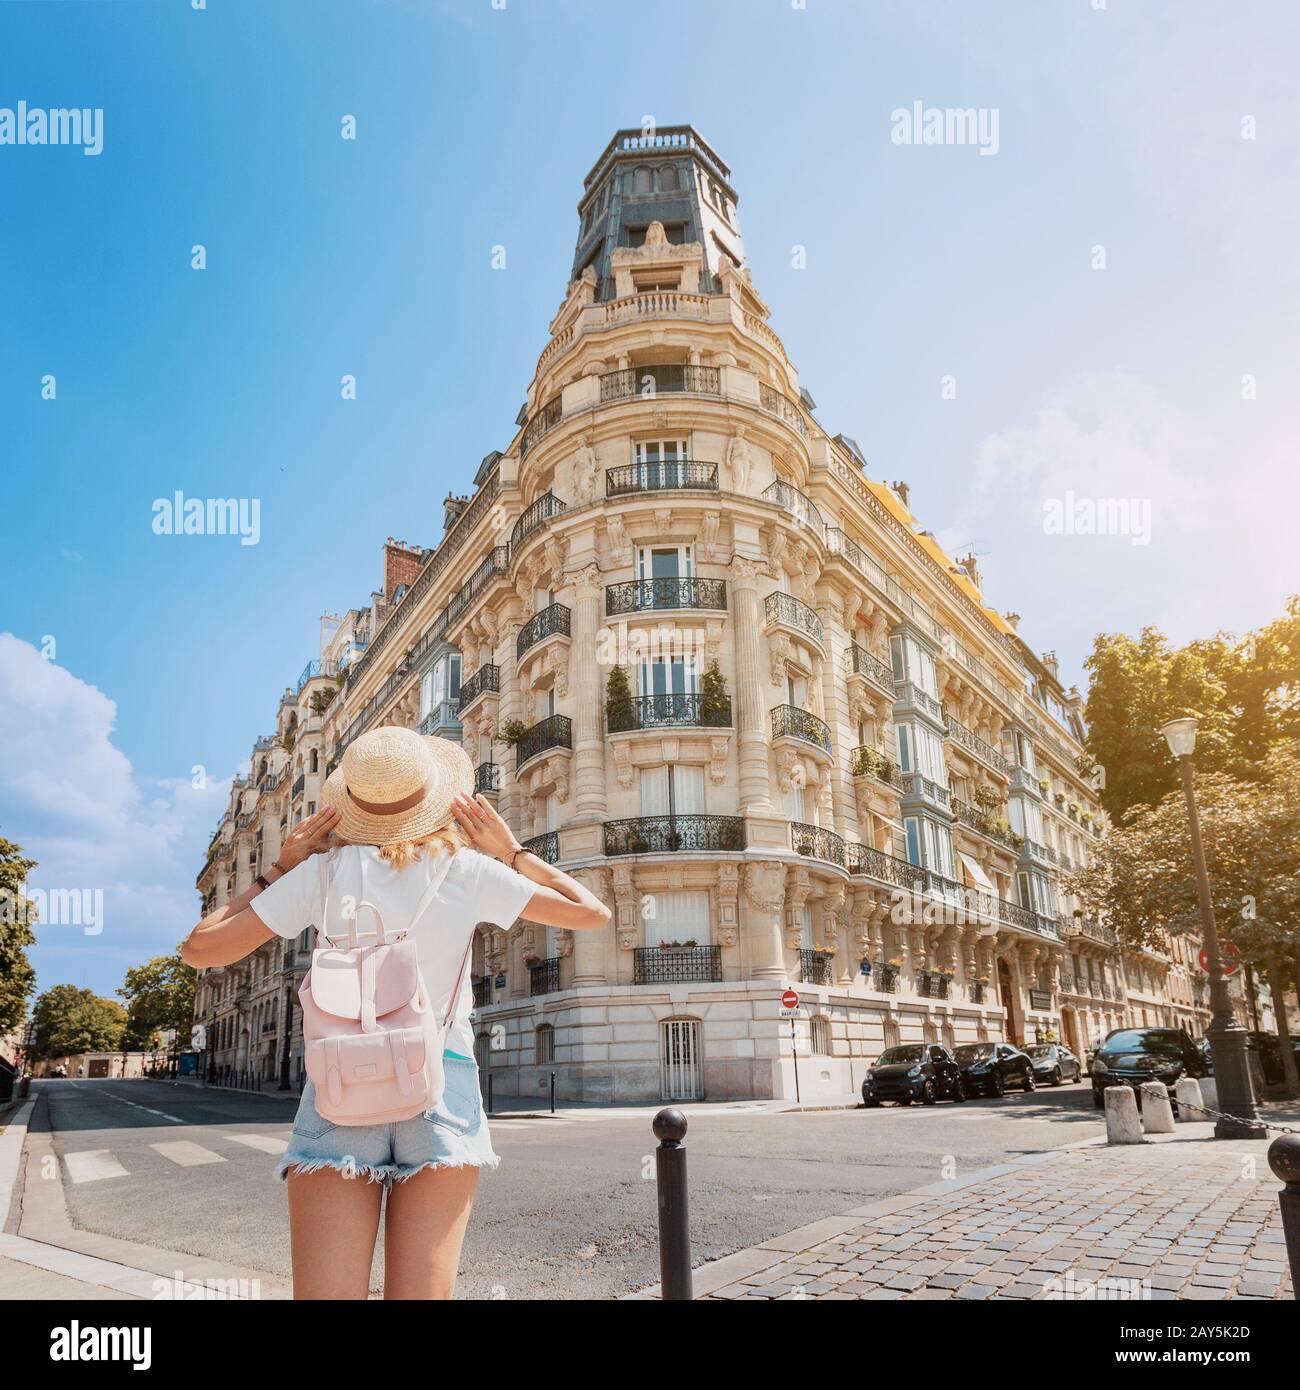 A woman stands near a typical Parisian residential corner house. Concept of apartments or hotels for tourists Stock Photo